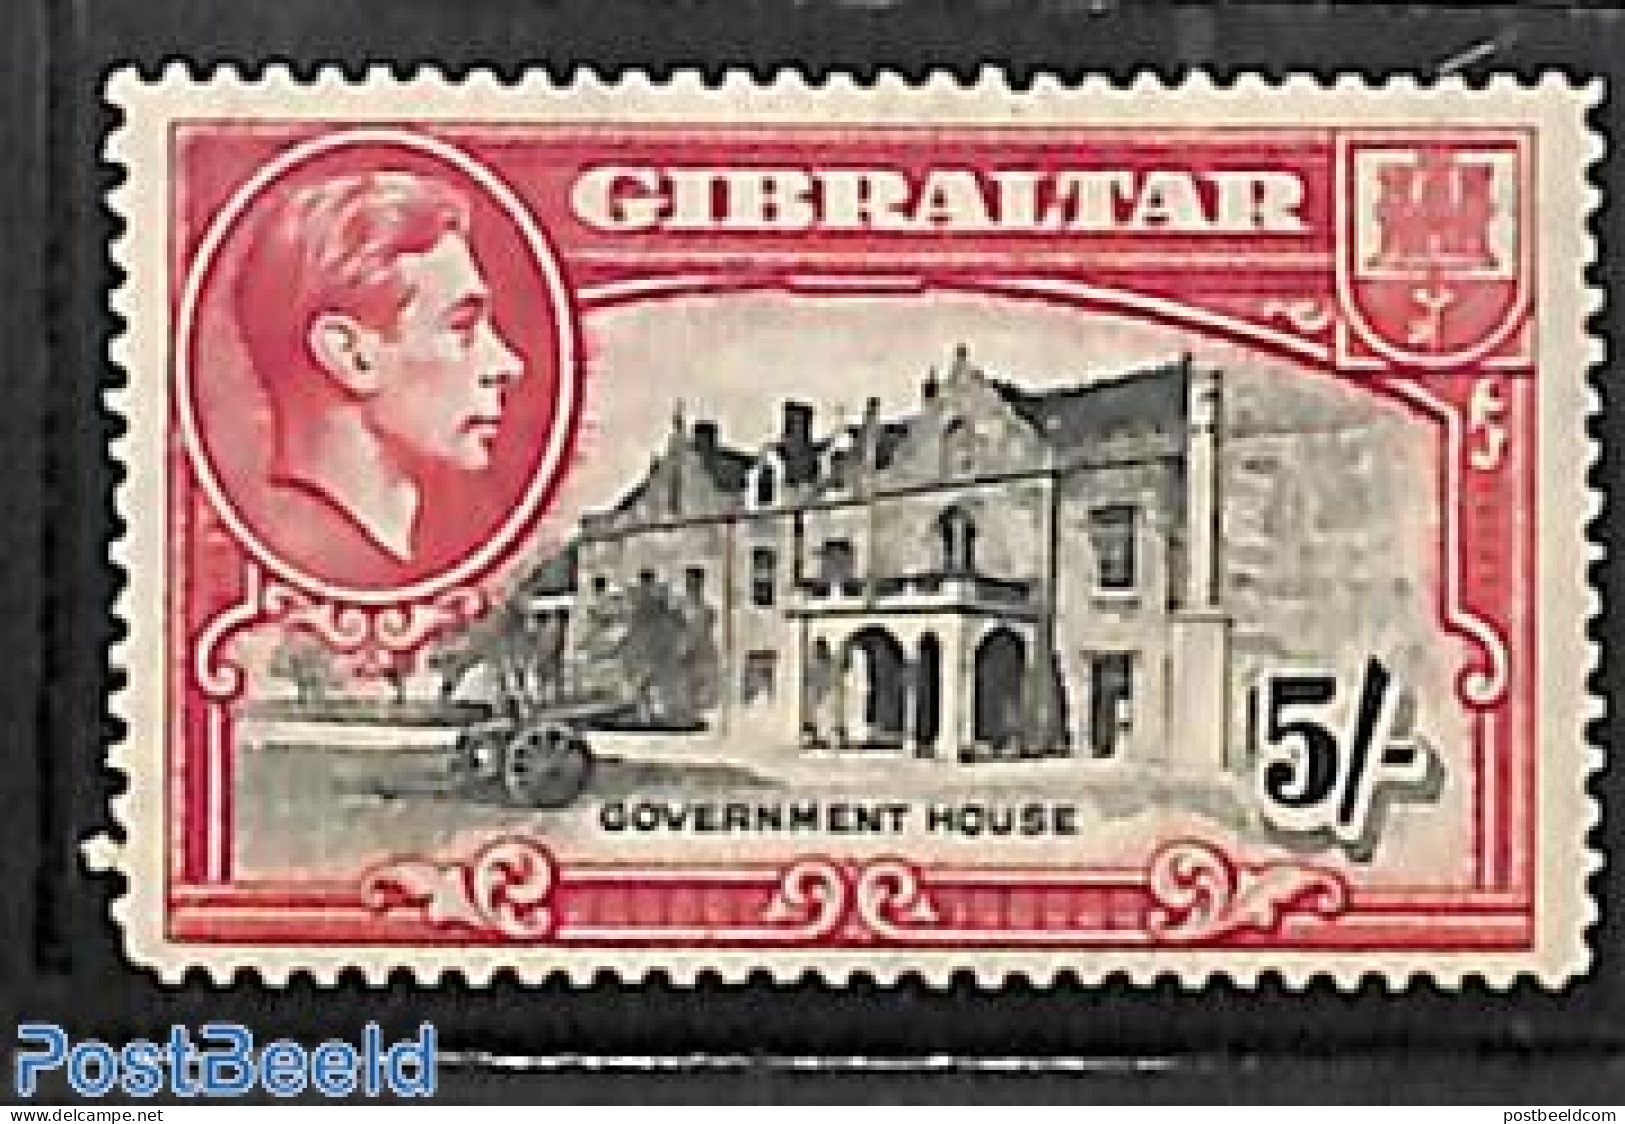 Gibraltar 1938 5Sh, Perf. 14, Stamp Out Of Set, Unused (hinged), Art - Architecture - Gibilterra